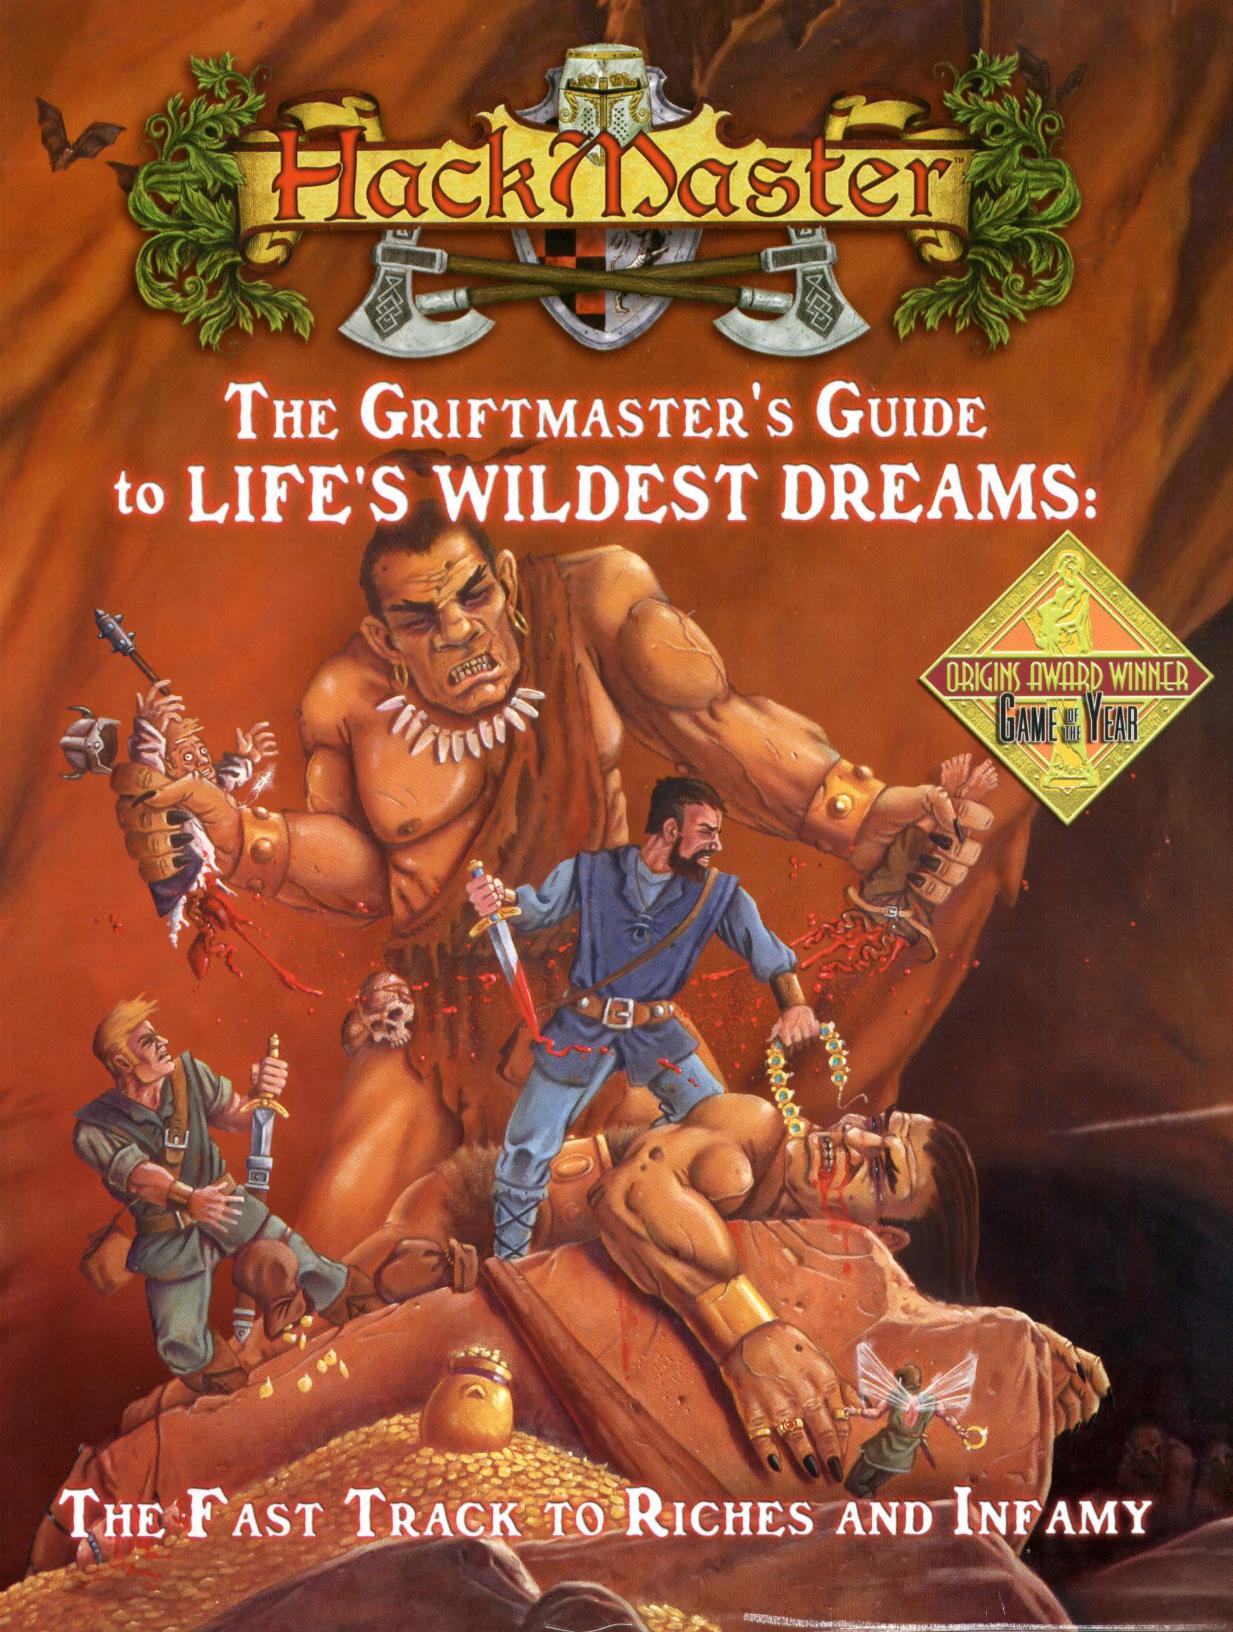 The Griftmaster's Guide To Life's Wildest Dreams